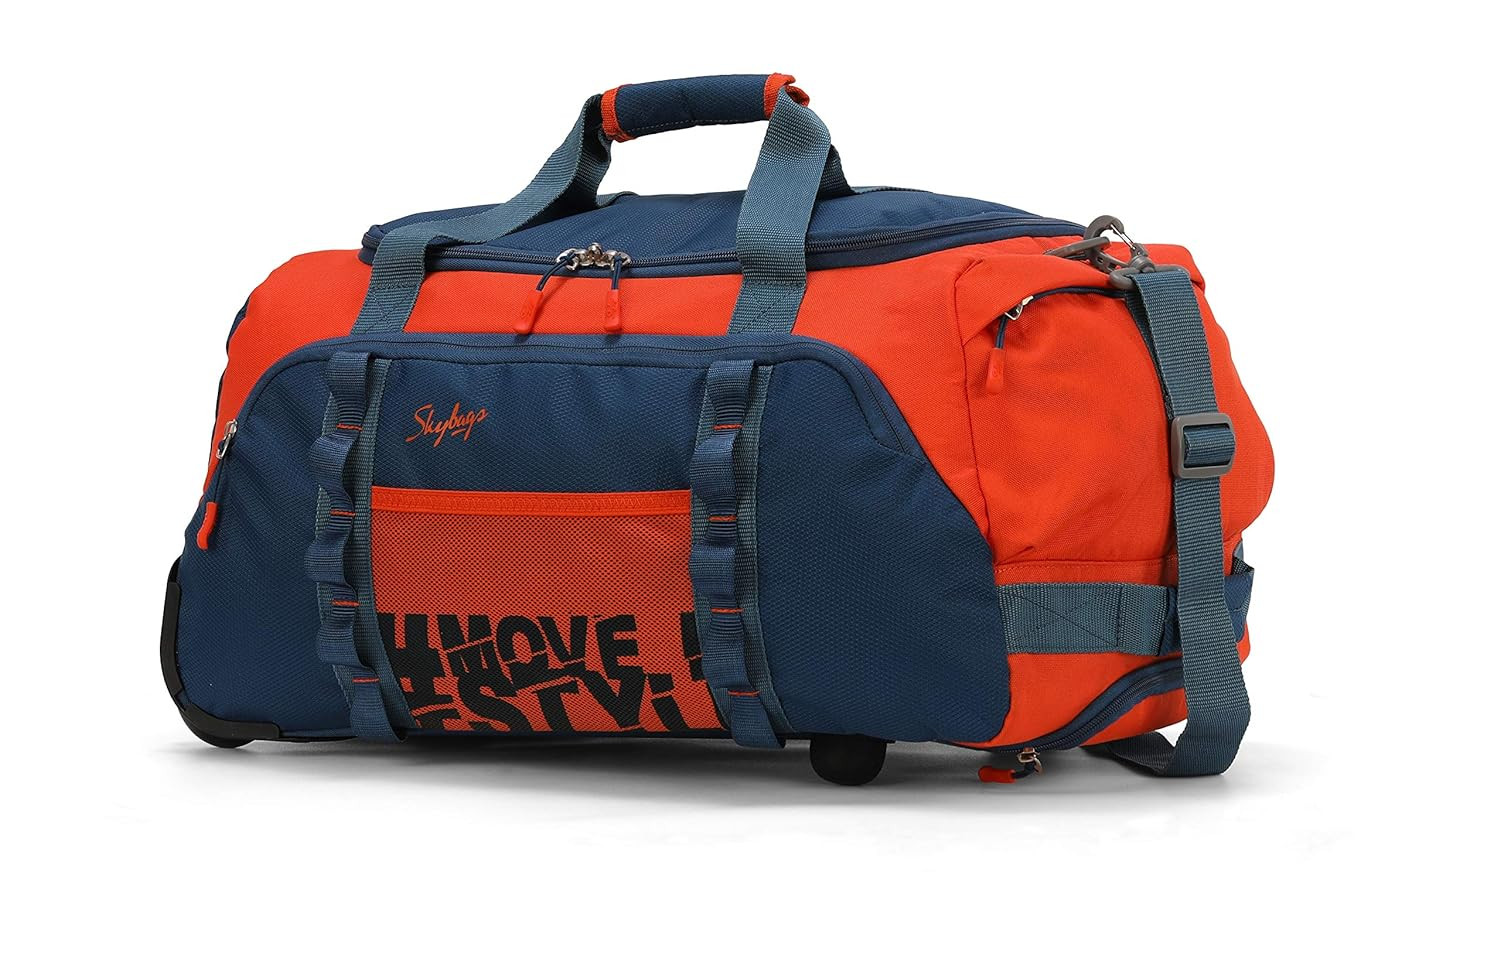 Skybags Polyester Solid Pattern Hustle Duffle Bag Dft 55 Orange Small 33 Cm